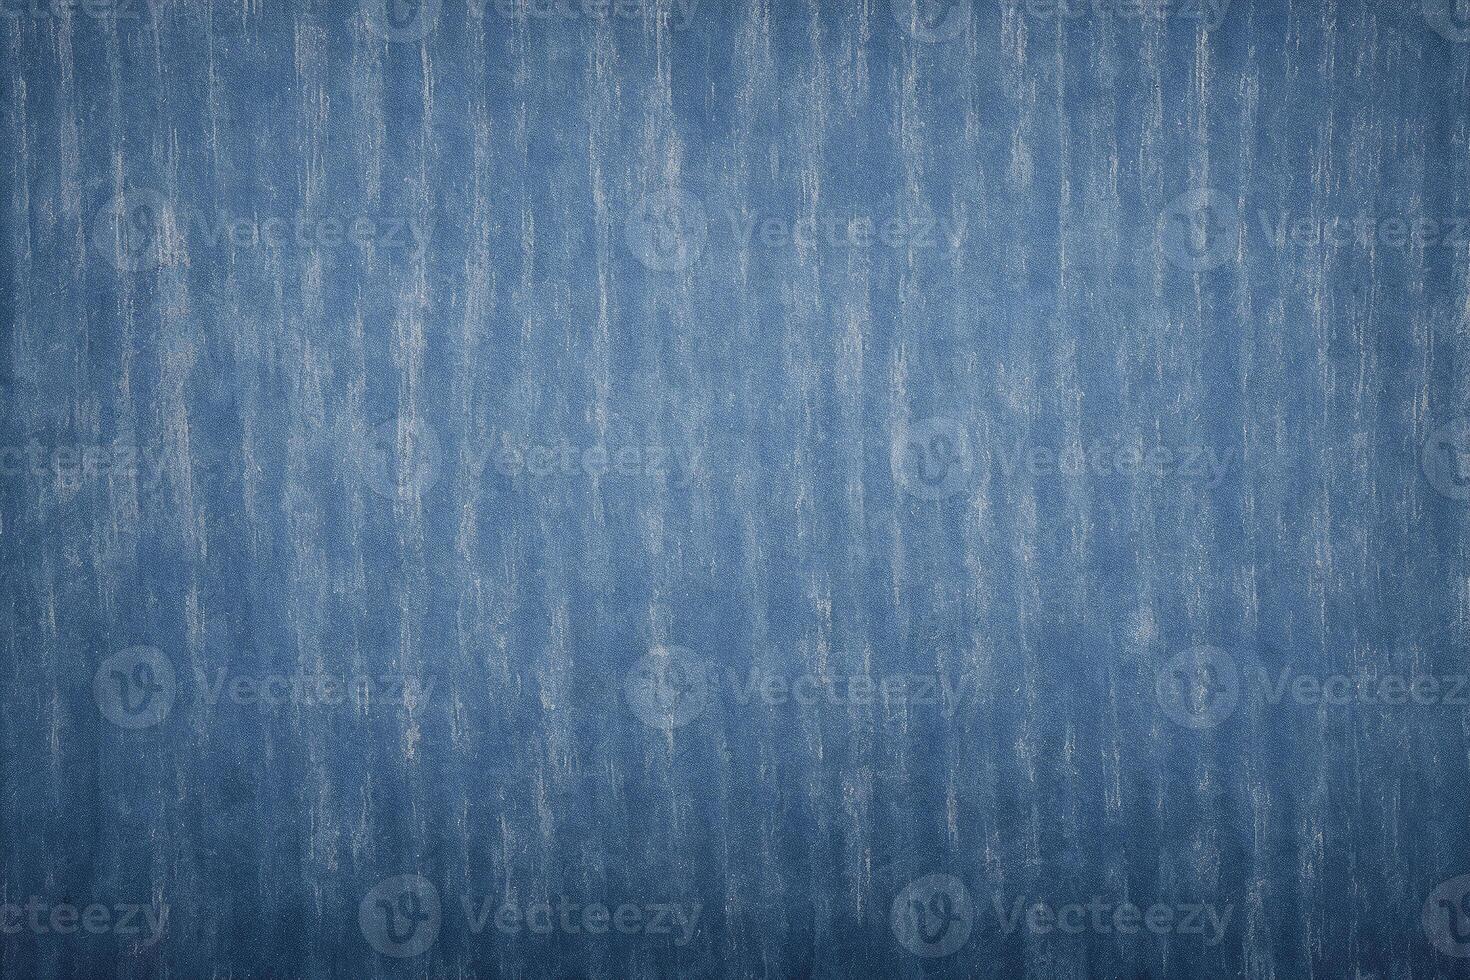 Grunge blue background with space for your text or image. Blue jeans background. photo